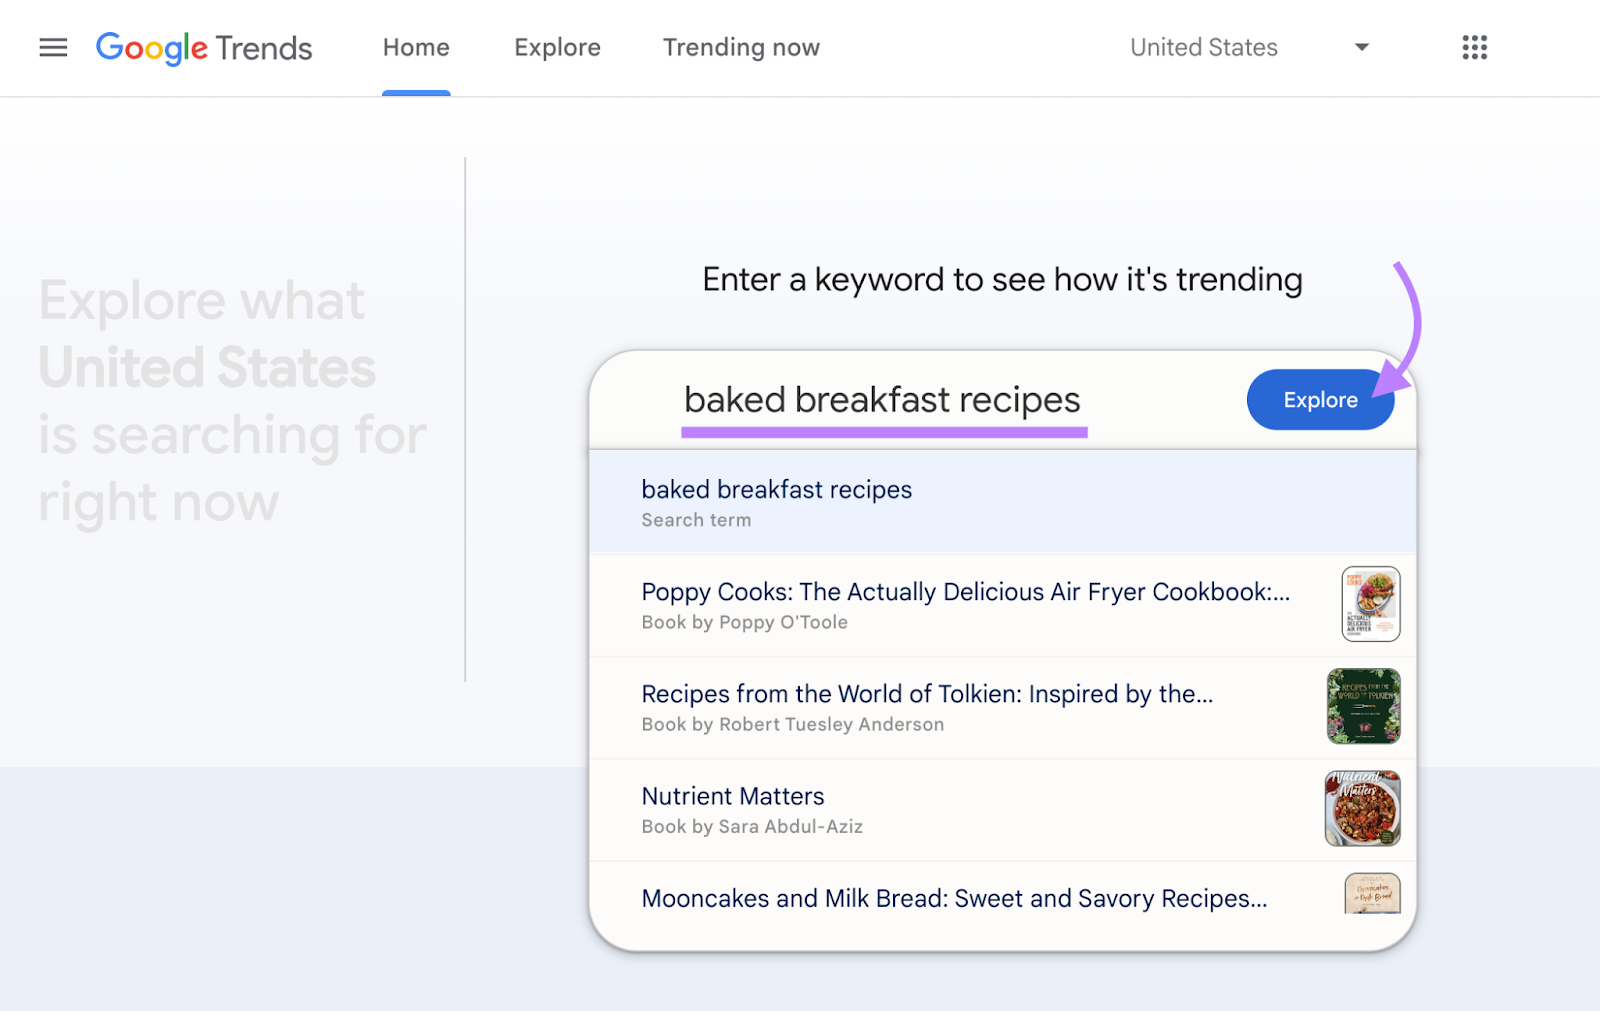 Google Trends interface with “baked breakfast recipes” entered in the search bar.